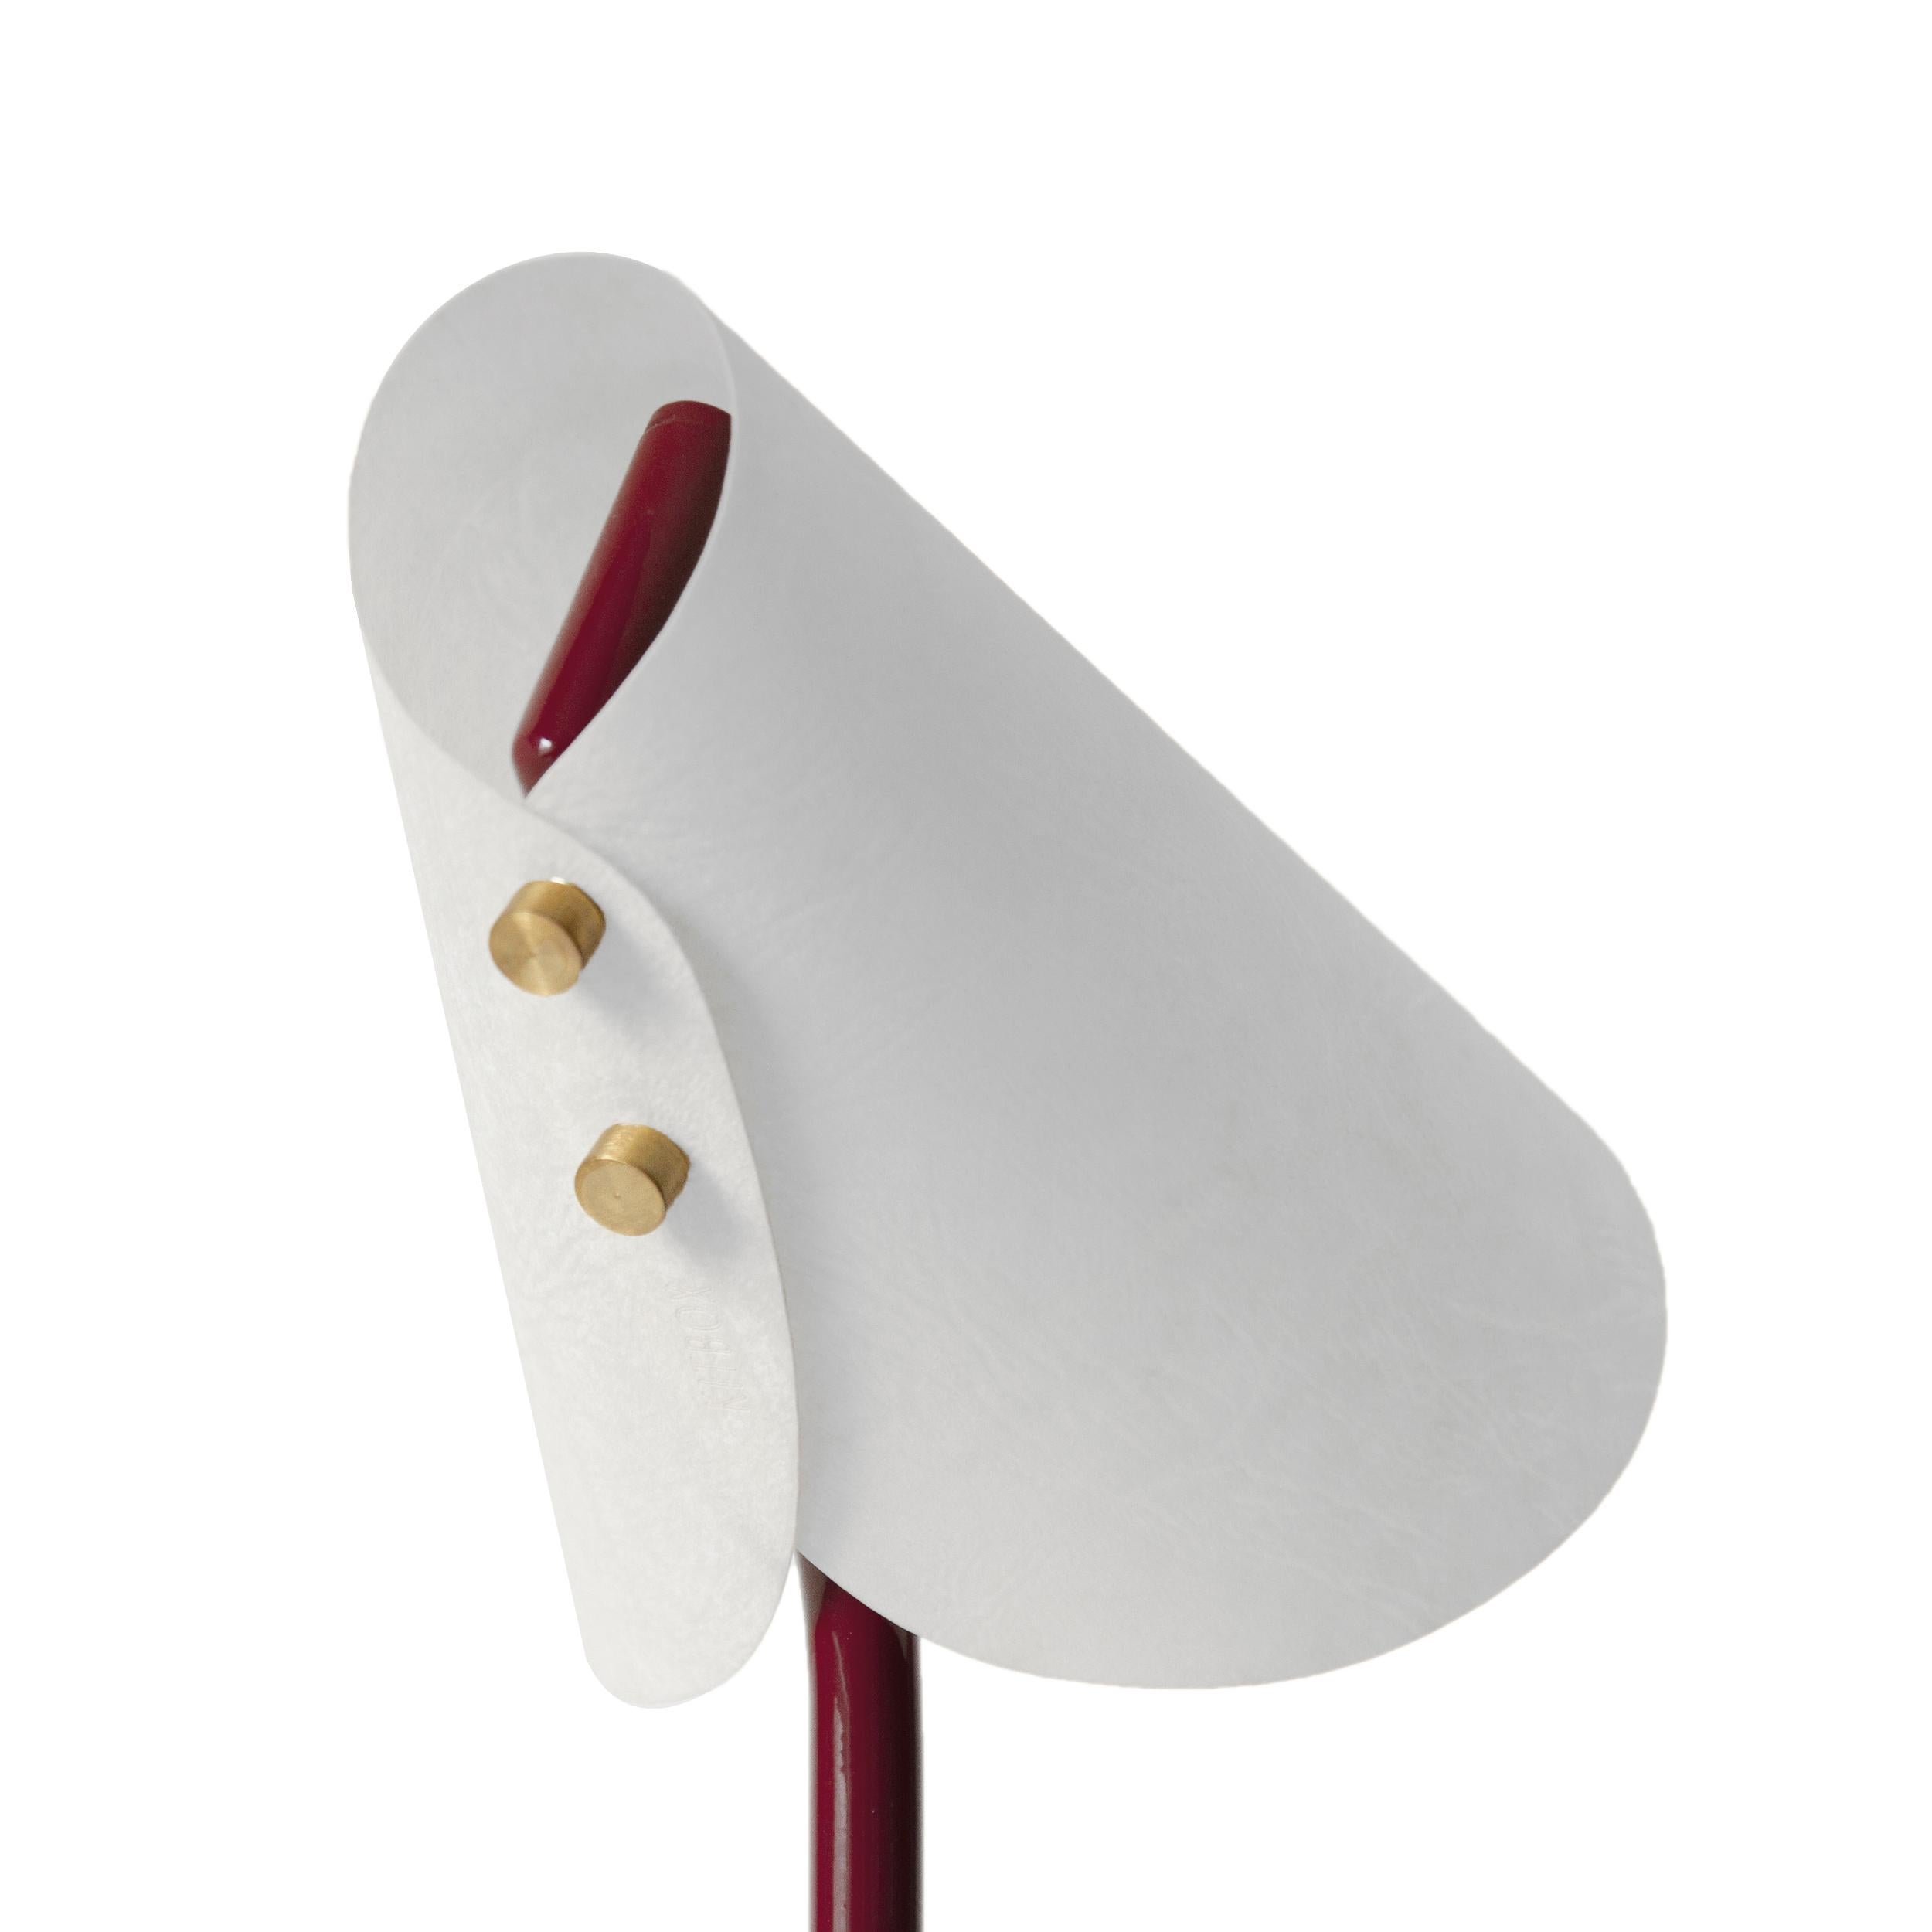 Turkish June Desk Lamp, Metal & Parchment, Maroon, Inspired by Victorian Bonnets